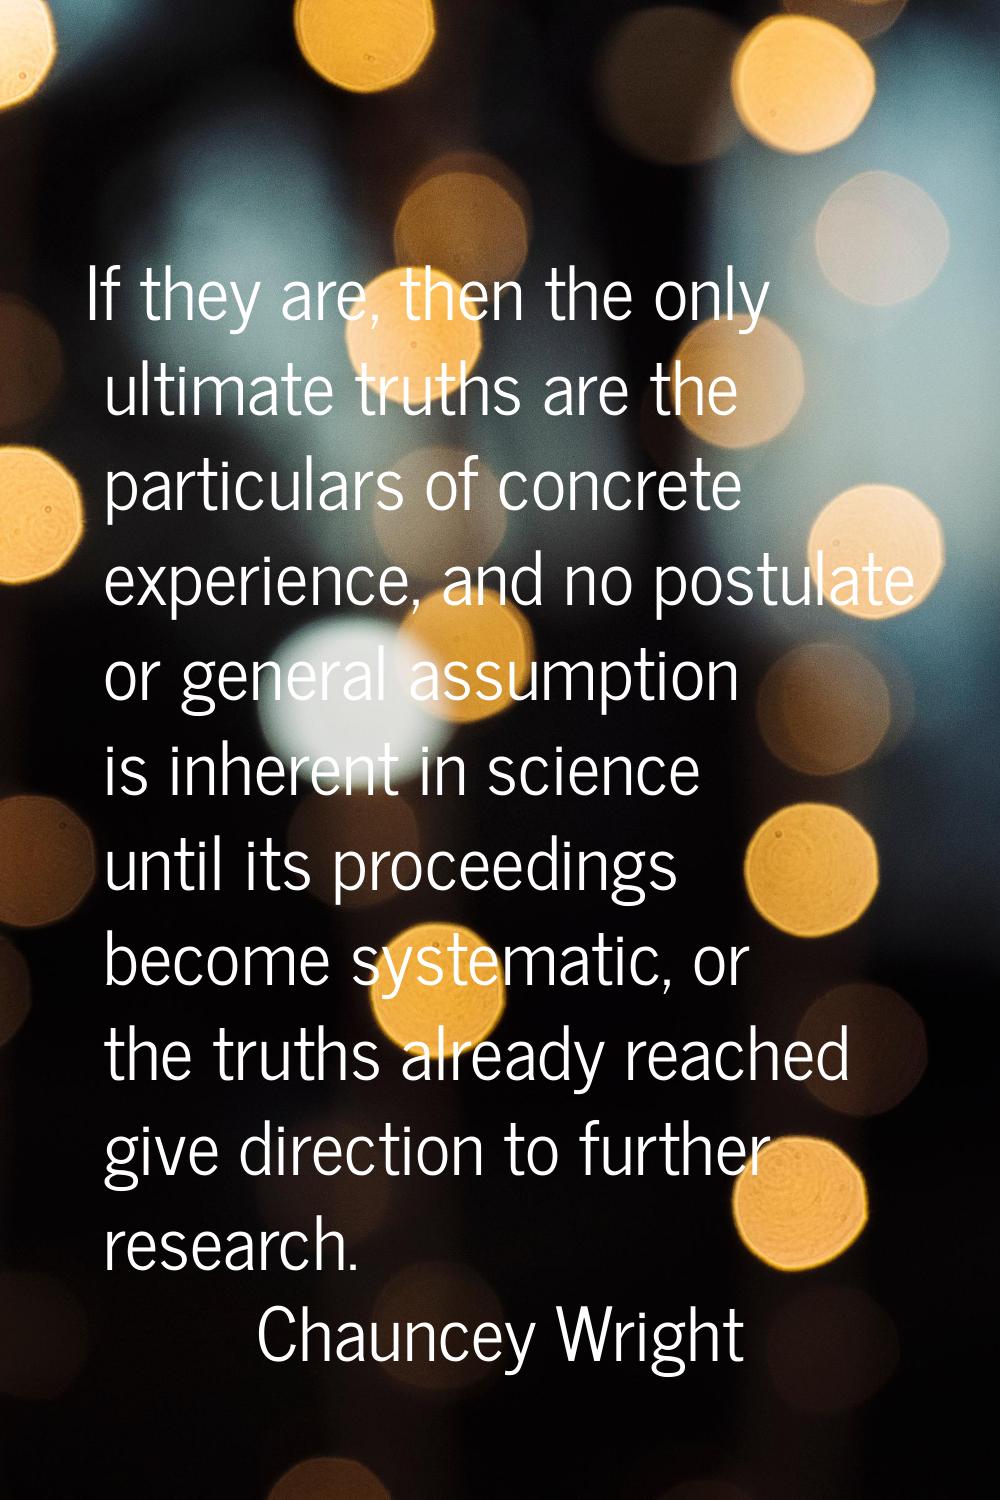 If they are, then the only ultimate truths are the particulars of concrete experience, and no postu